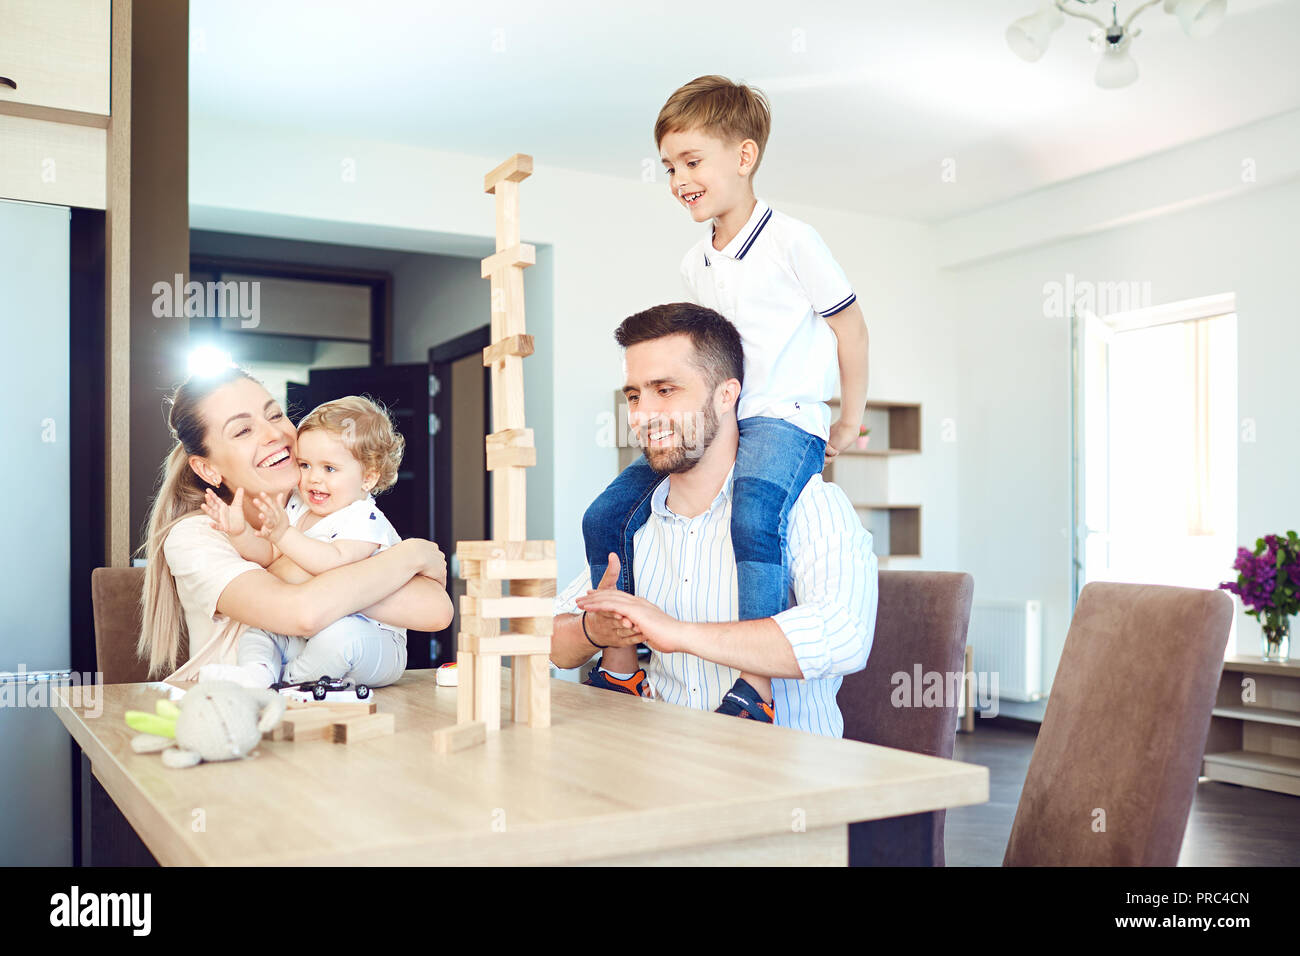 A family plays board games sitting at a table indoors. Stock Photo